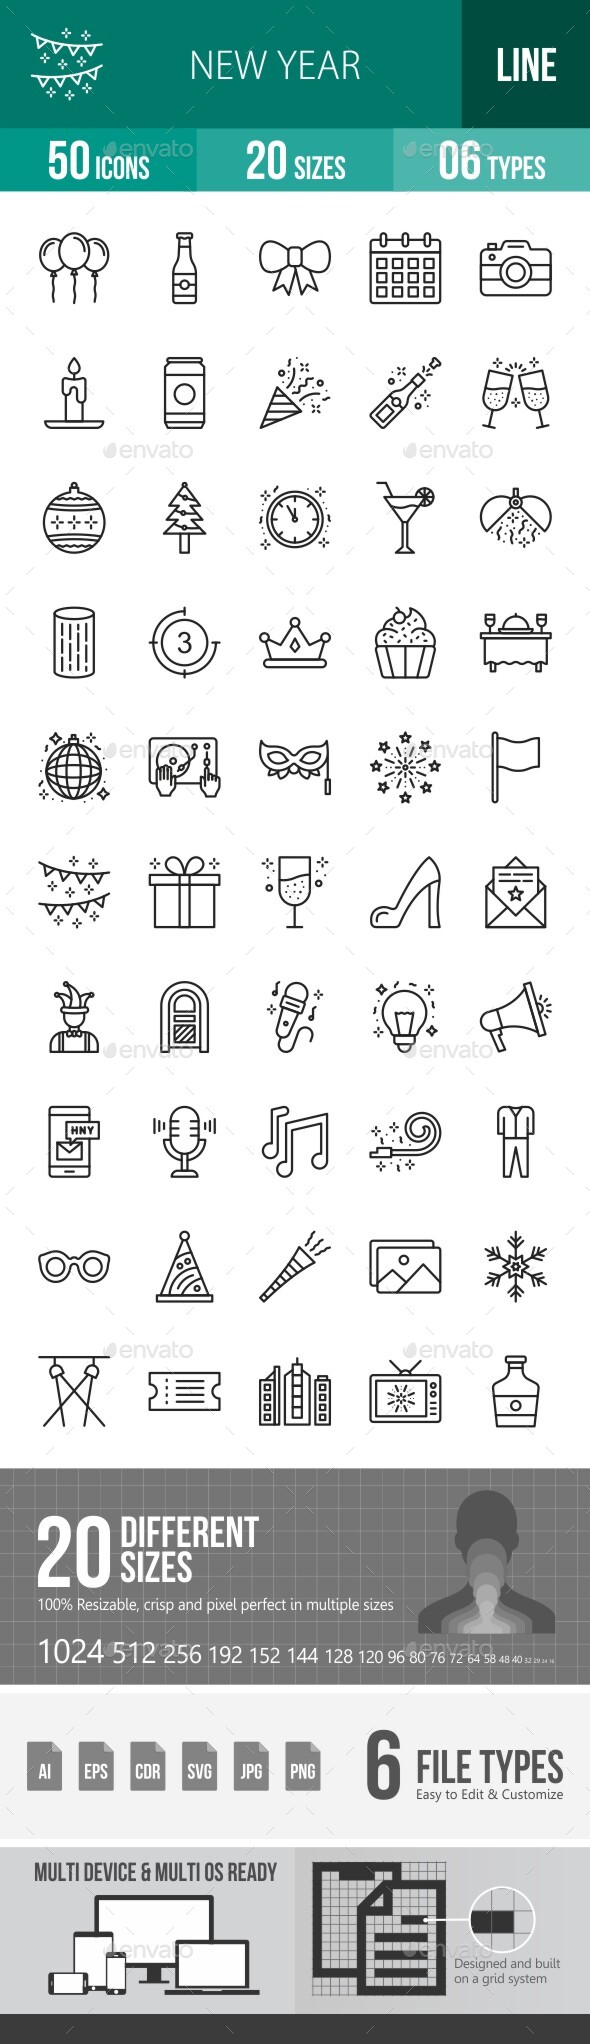 [DOWNLOAD]New Year Line Icons